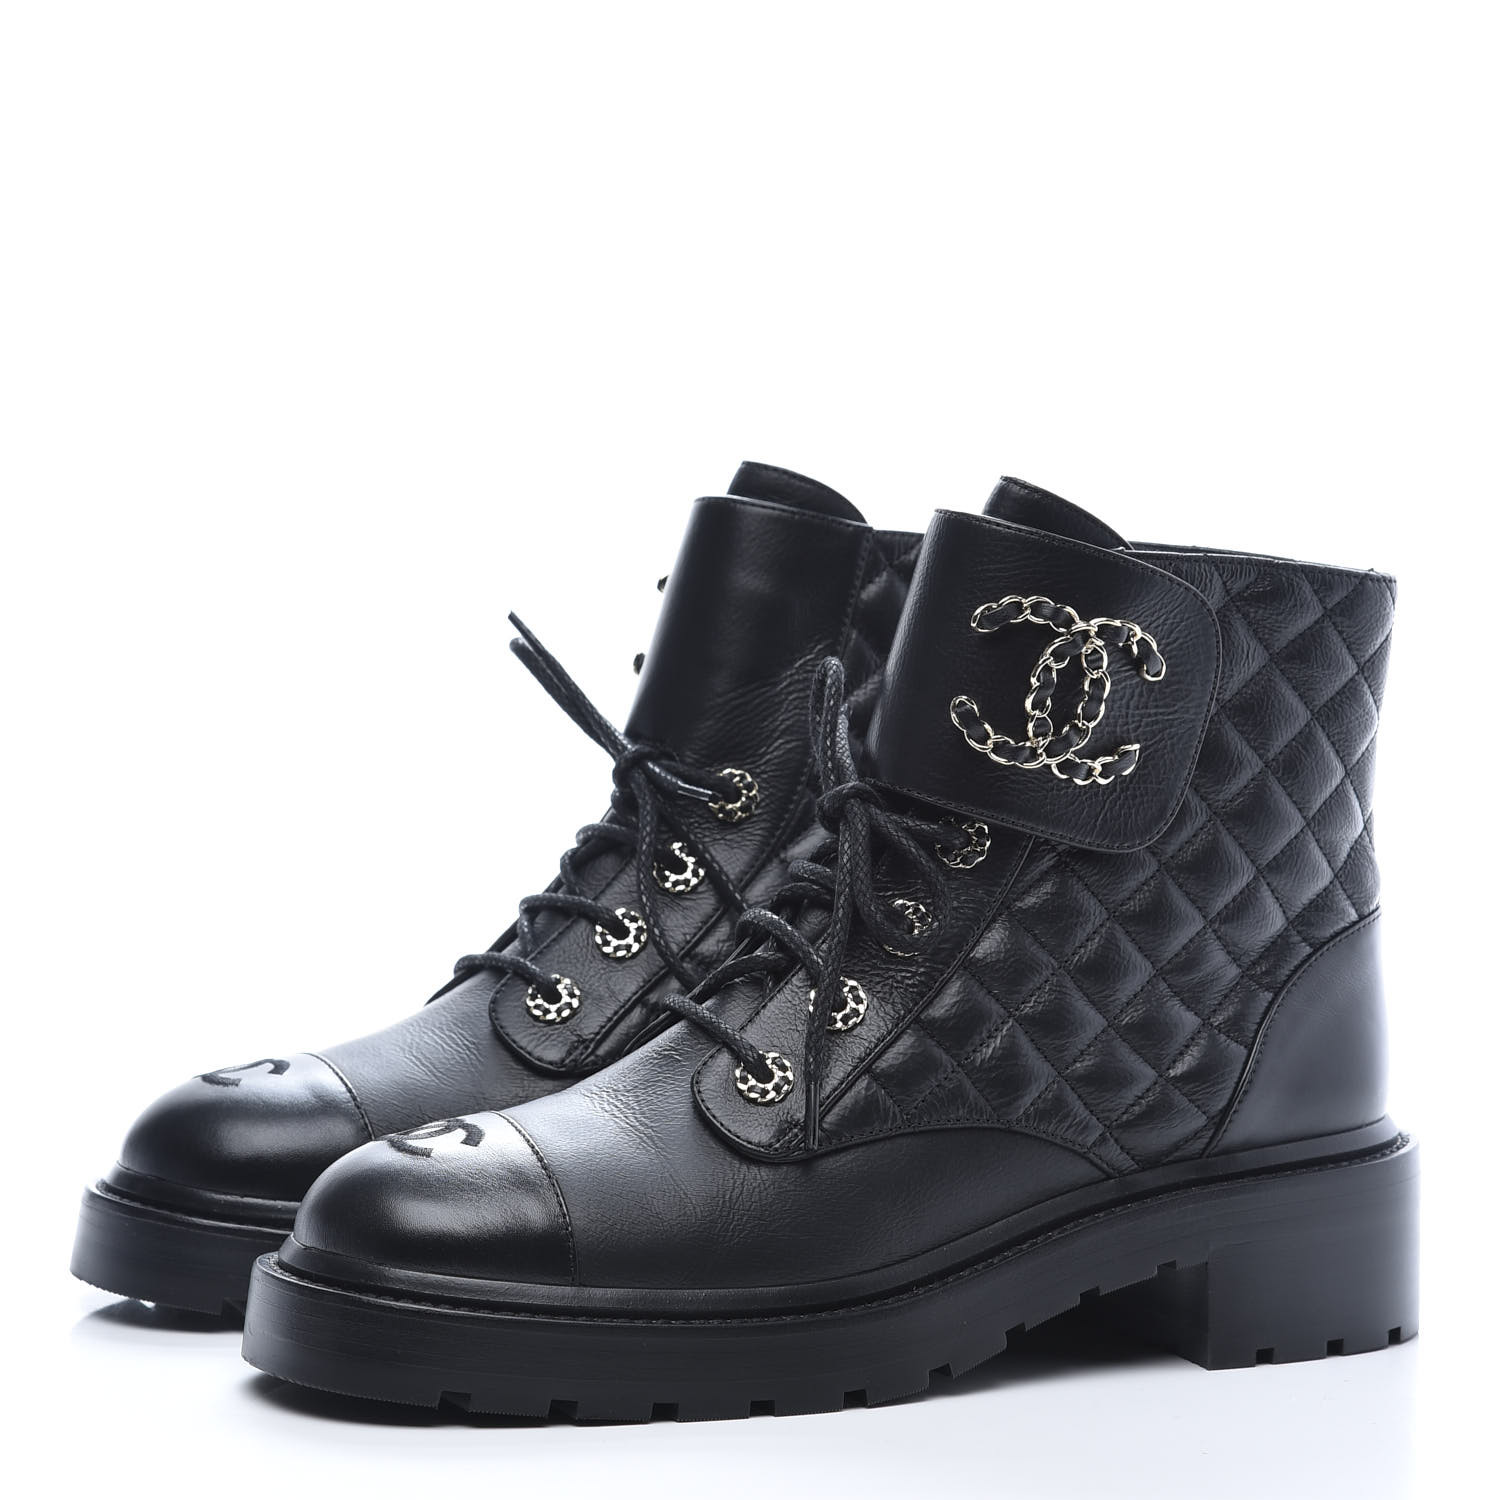 CHANEL Shiny Goatskin Calfskin Quilted Lace Up Combat Boots 40.5 Black